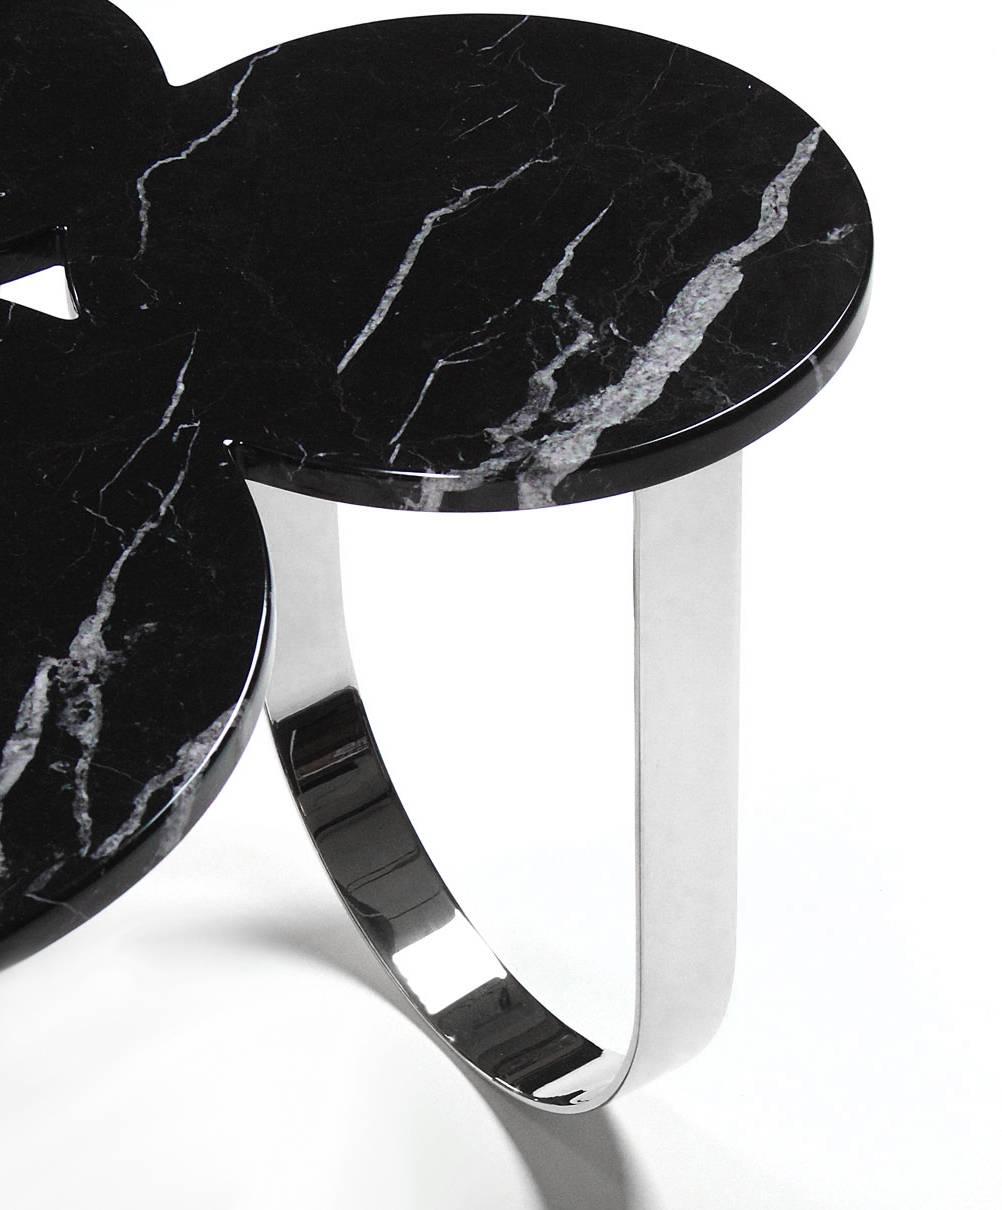 The 'Cloud' is a spectacular side table with structure in mirror polished stainless steel and top in Marquinia marble.The mirror-like finishing of the stainless steel creates different perceptions of this particular material and allows interesting